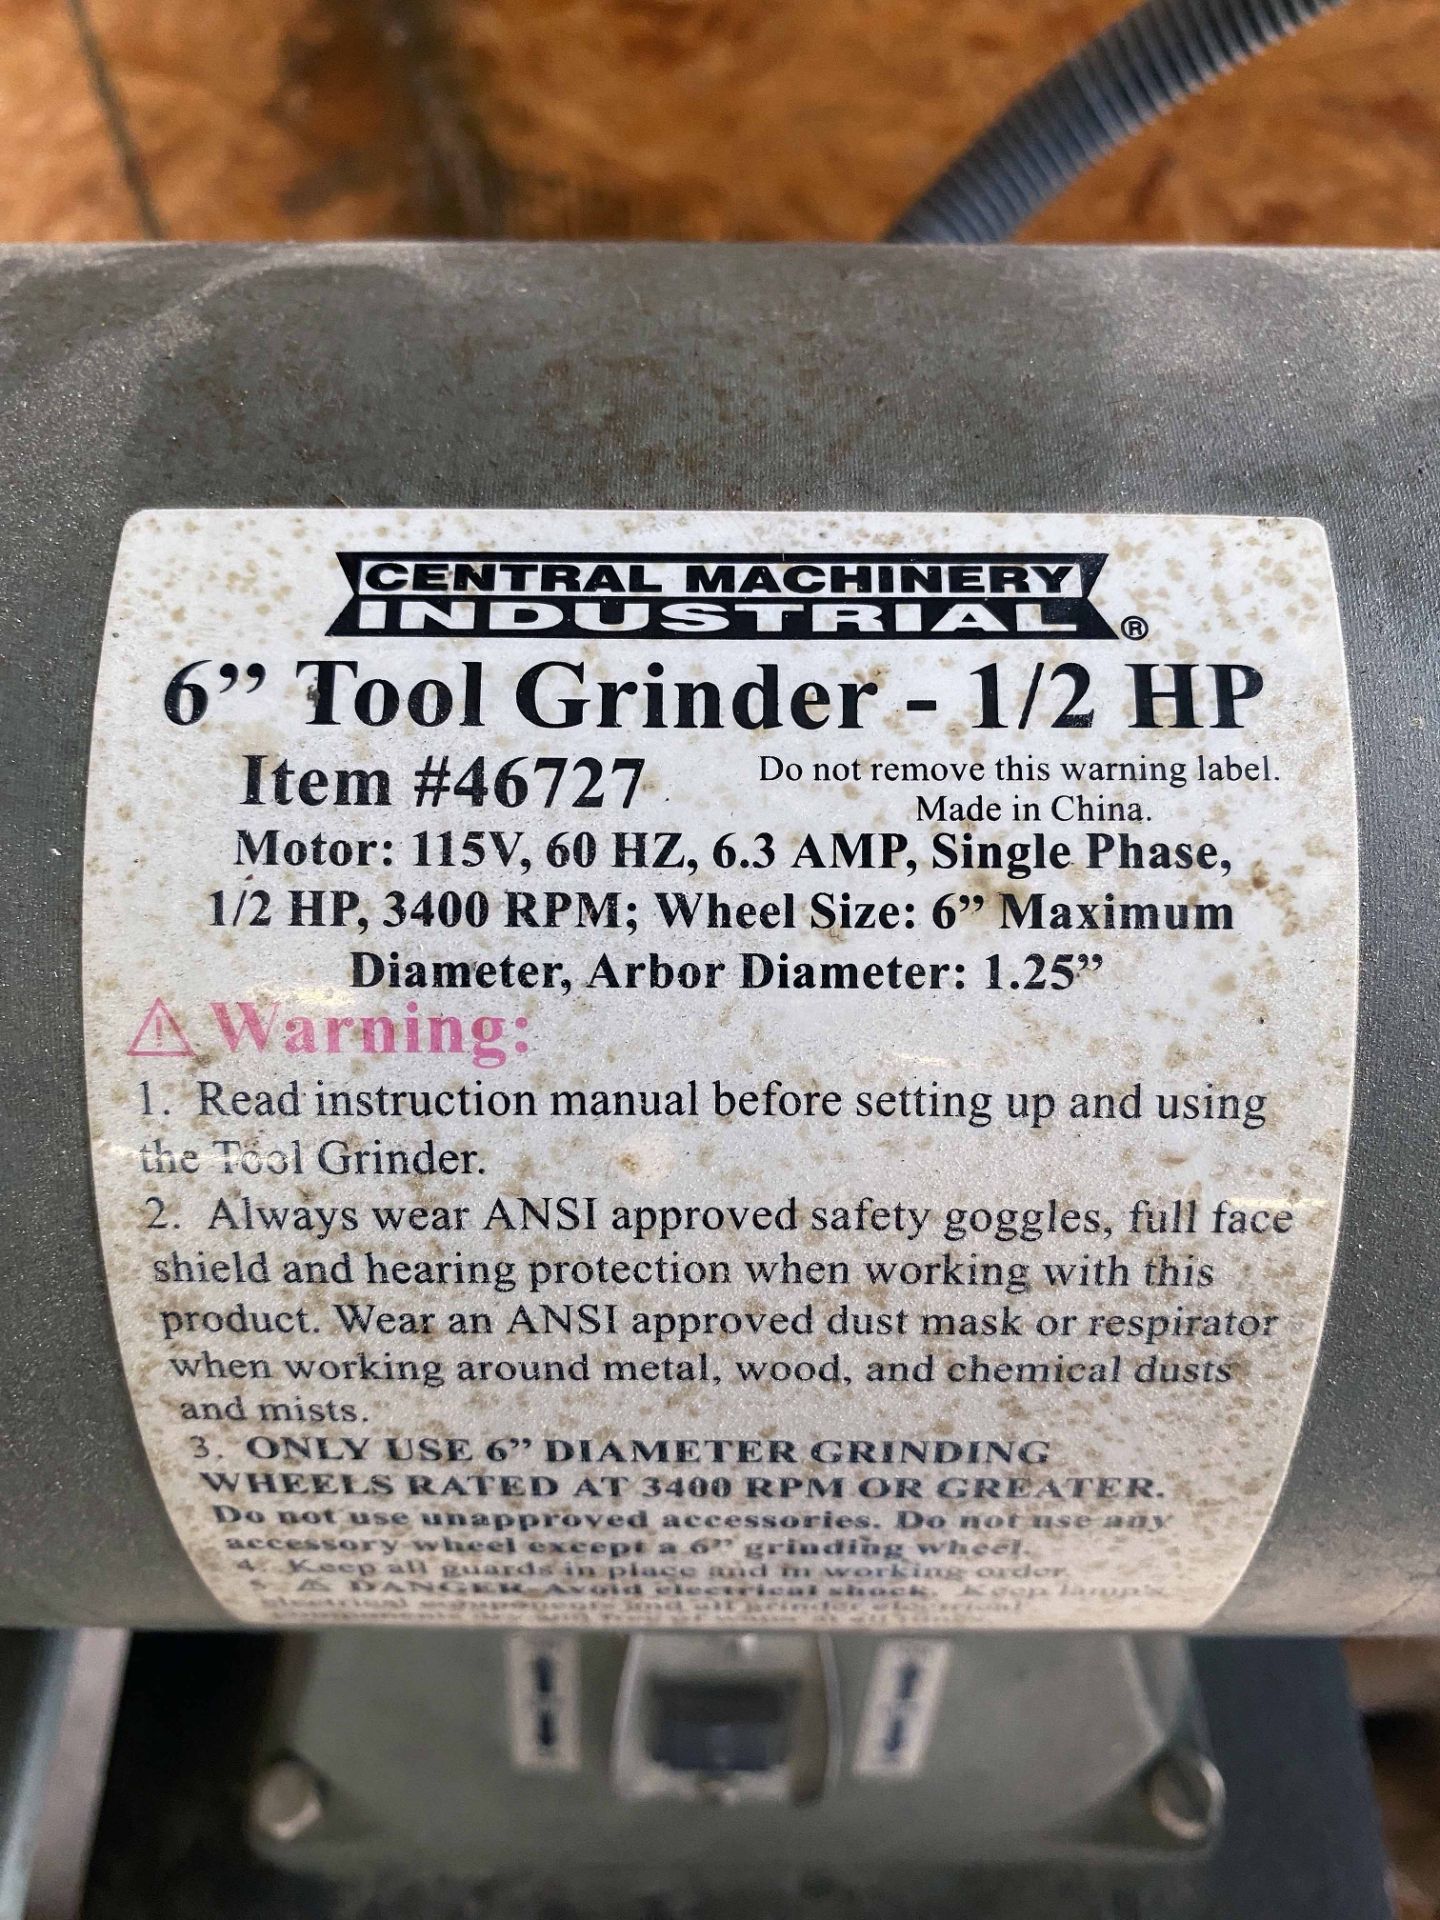 TOOL GRINDER, CENTRAL MACHINERY 6” (Located at: Star Machine Works, 150 Robin Dr., Livingston, TX - Image 2 of 2